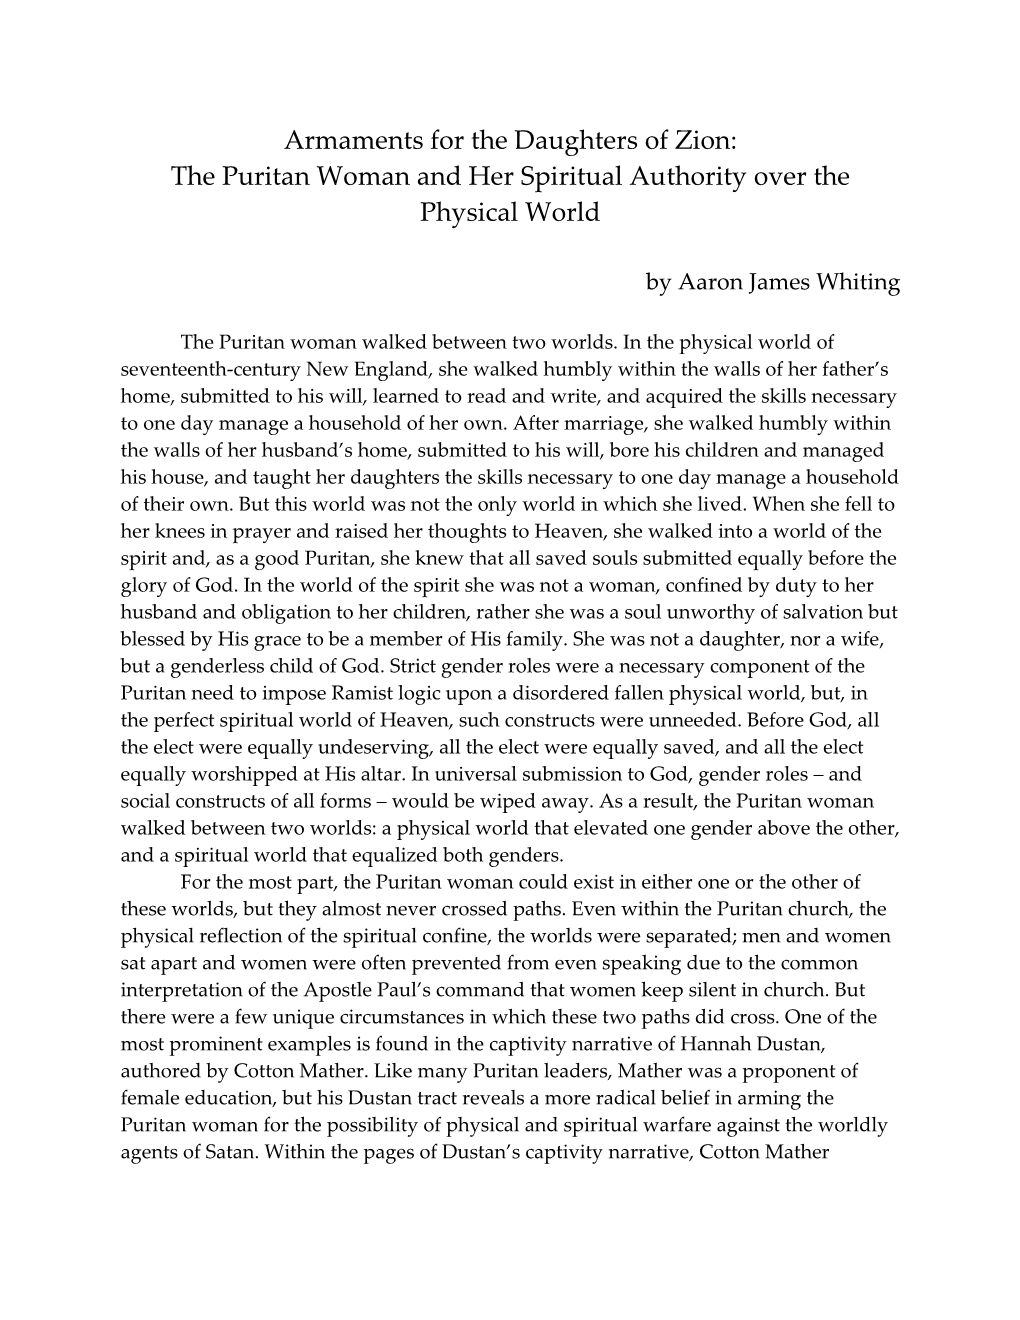 The Puritan Woman and Her Spiritual Authority Over the Physical World